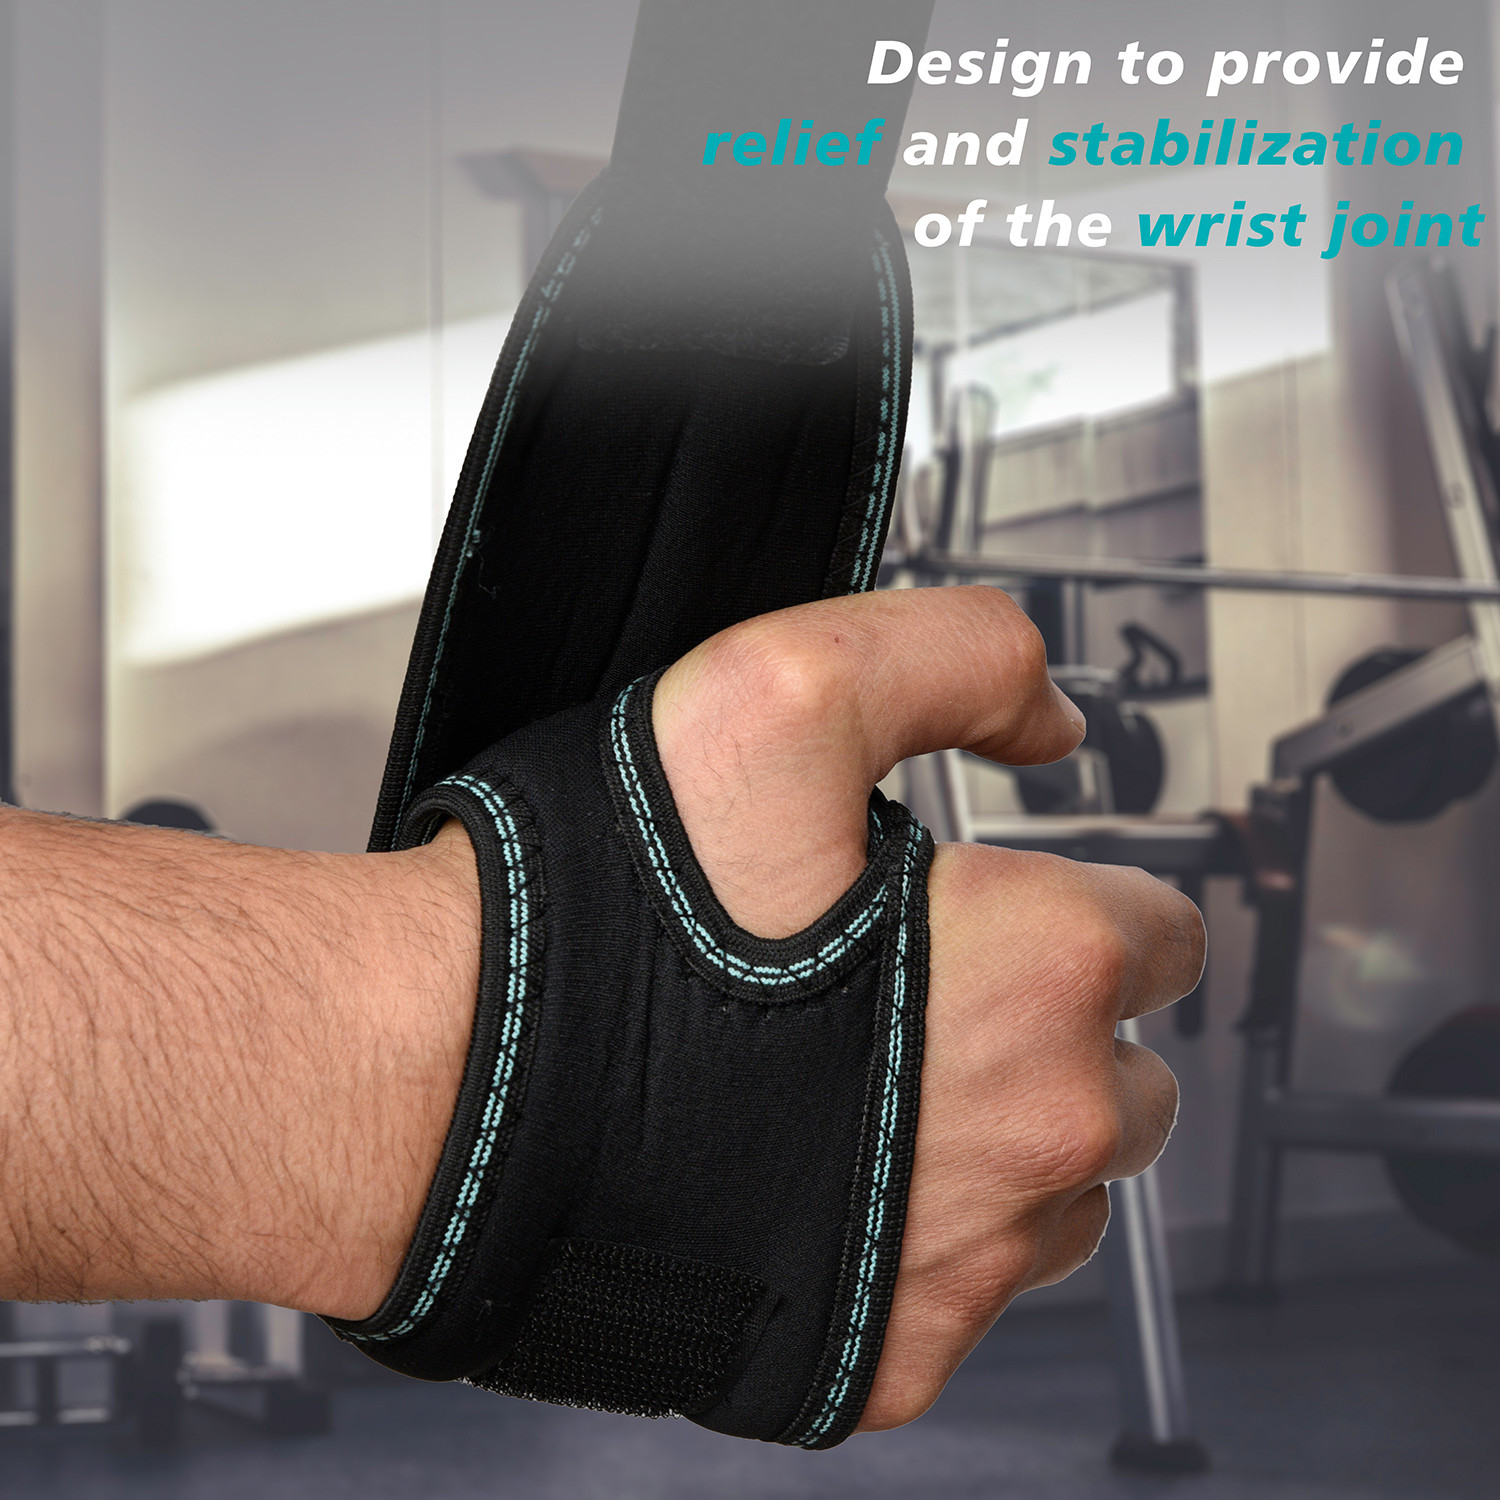 Kuber Industries Wrist Brace with Thumb Loop | Drytex Wrist Supporter for Gym | Nylon Wrist Wrap Band Strap for Men and Women | Pain Relief Band | 1 Pair | Black